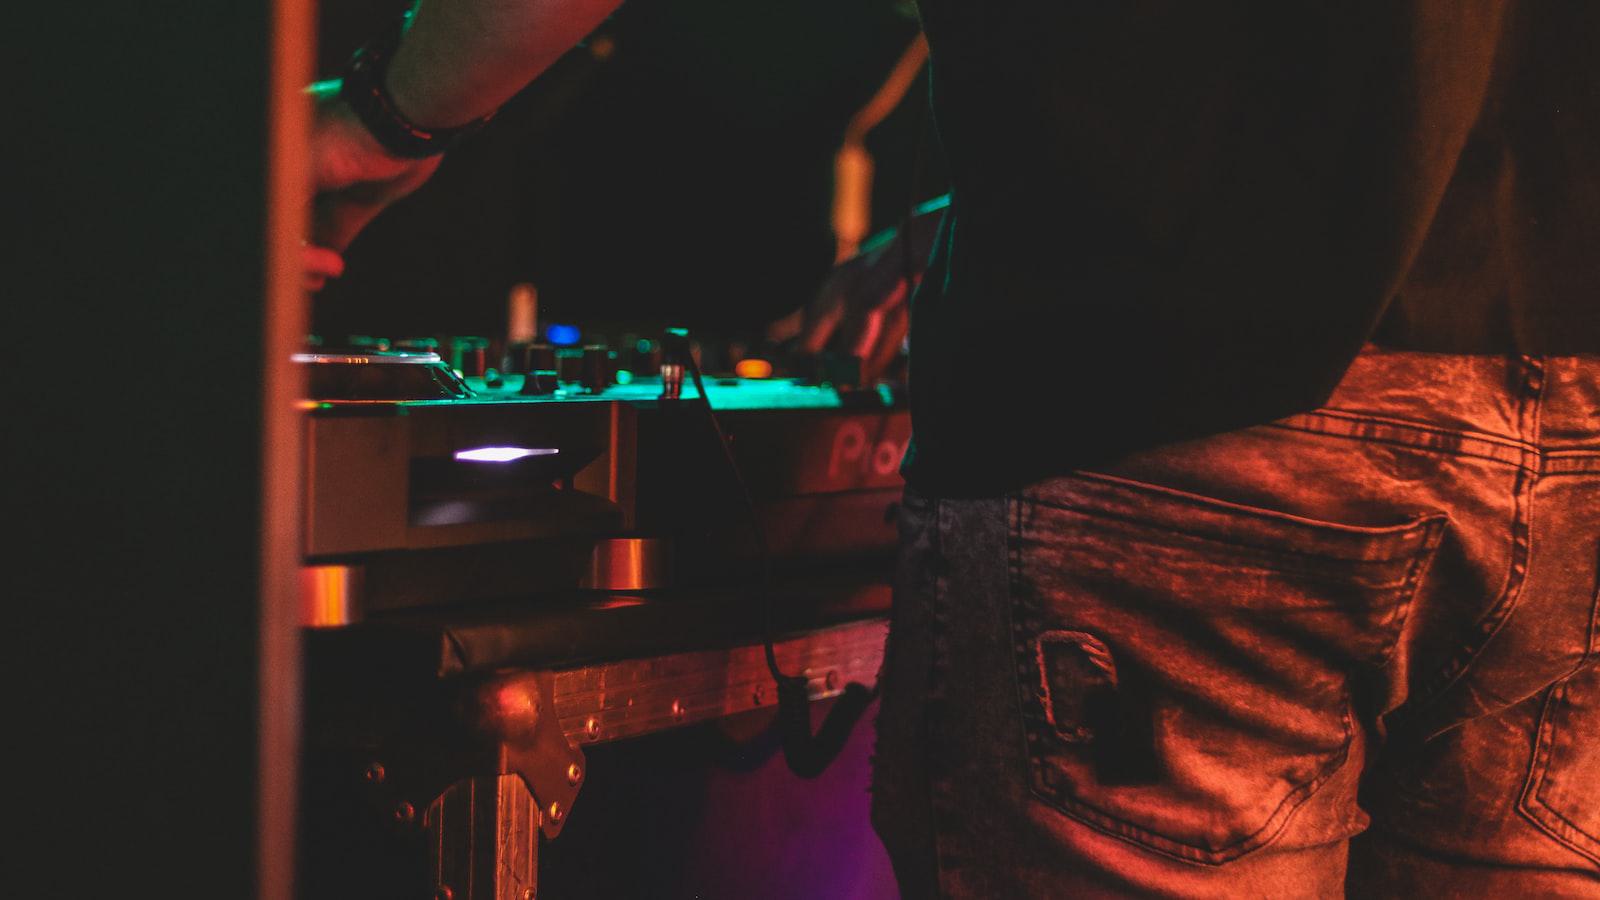 2. Examining‍ What Makes a Great DJ Performance